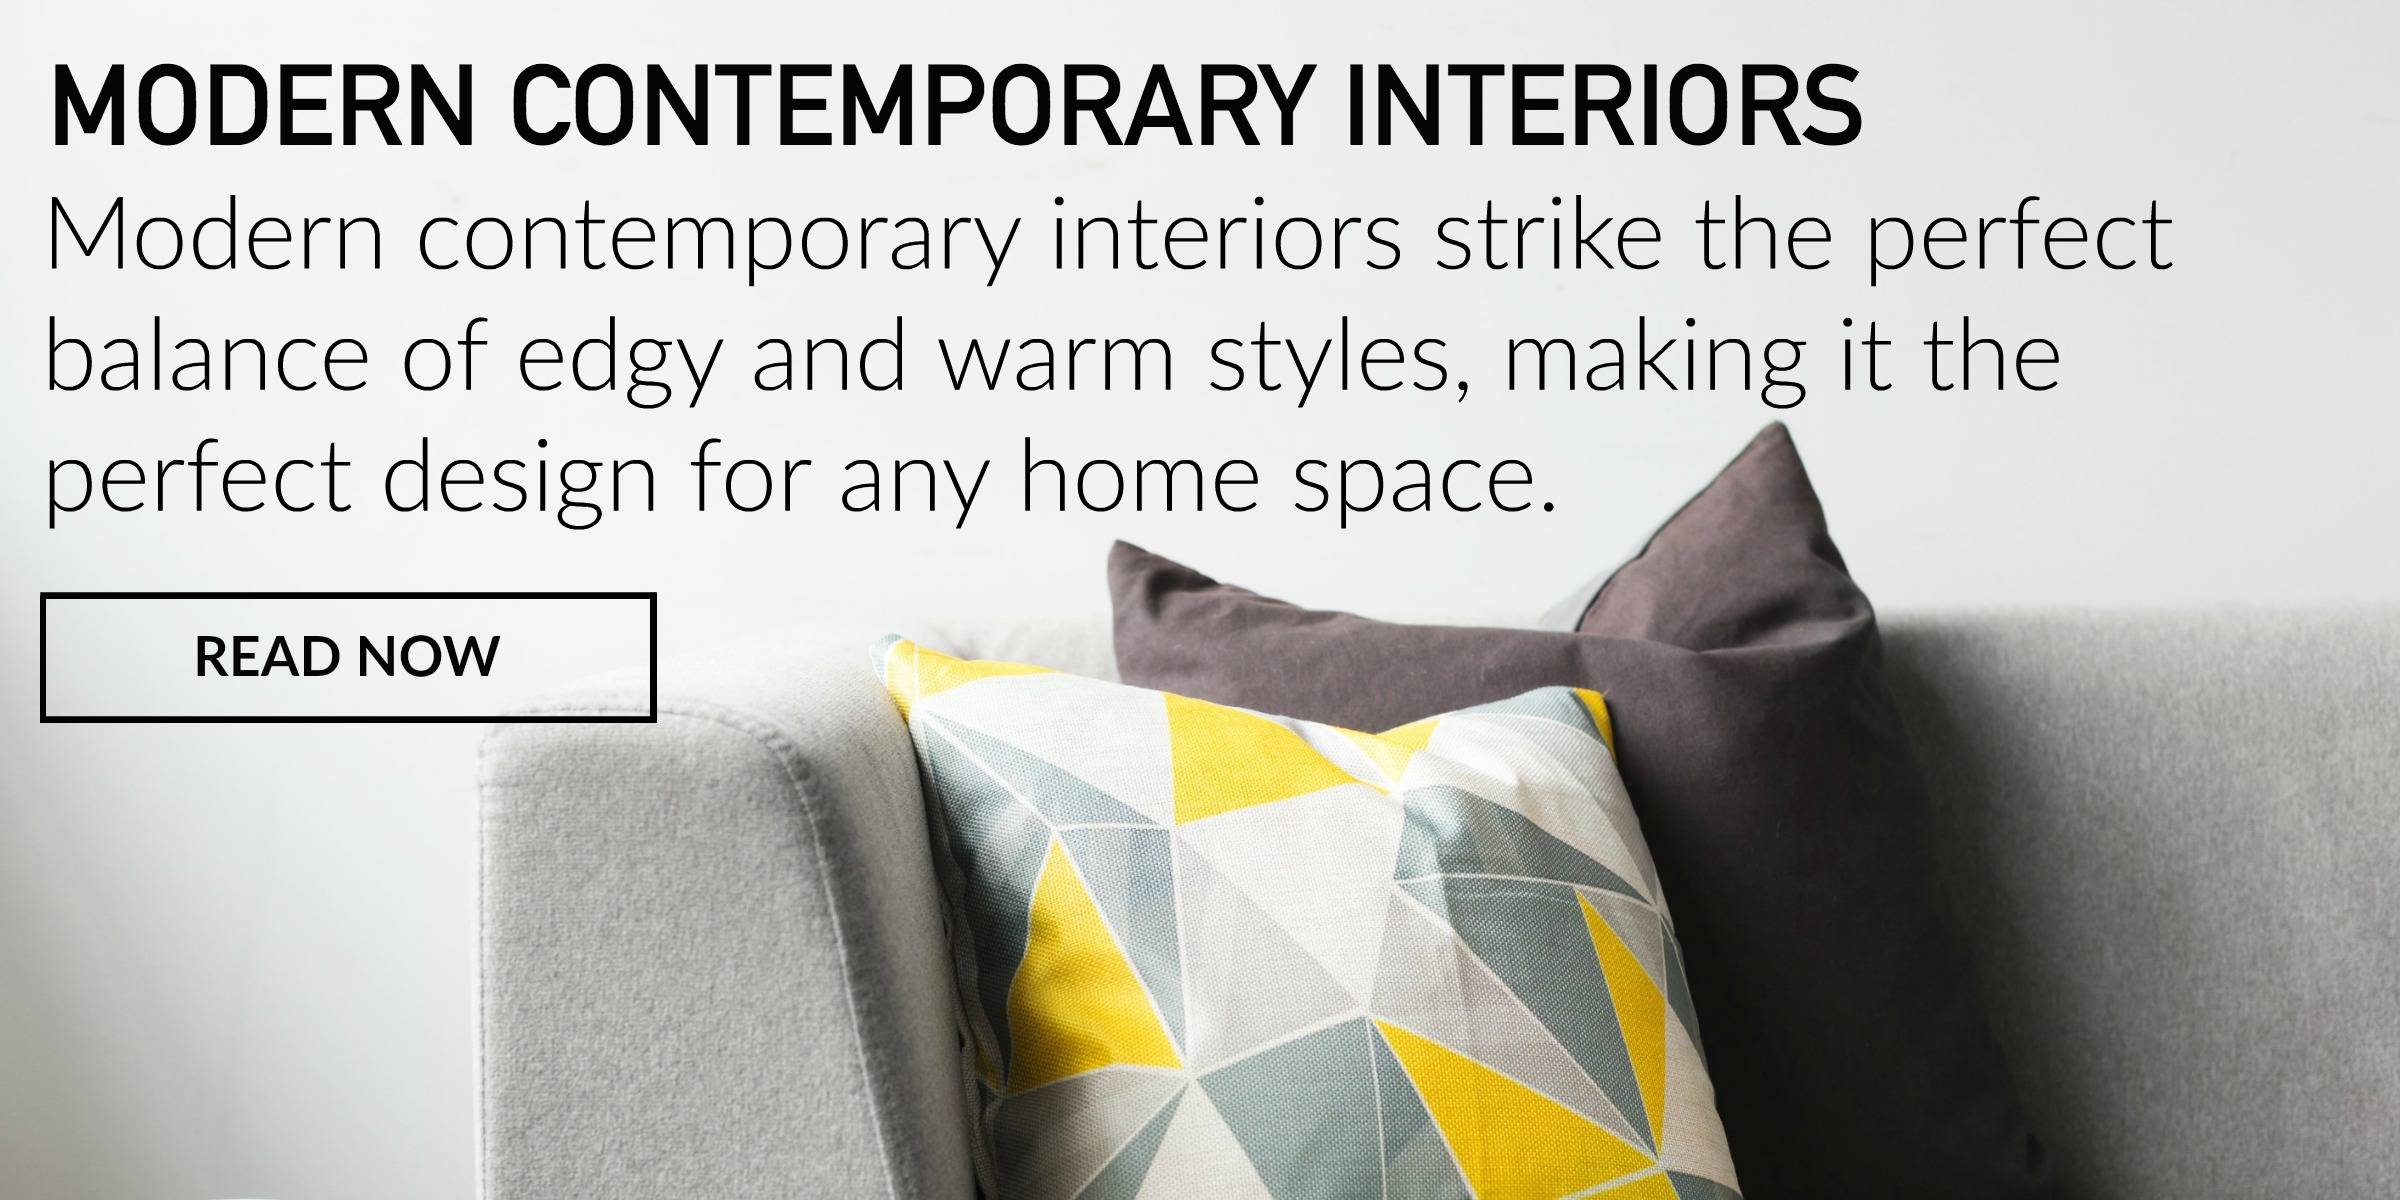 Learn How to Design a Modern Contemporary Interior